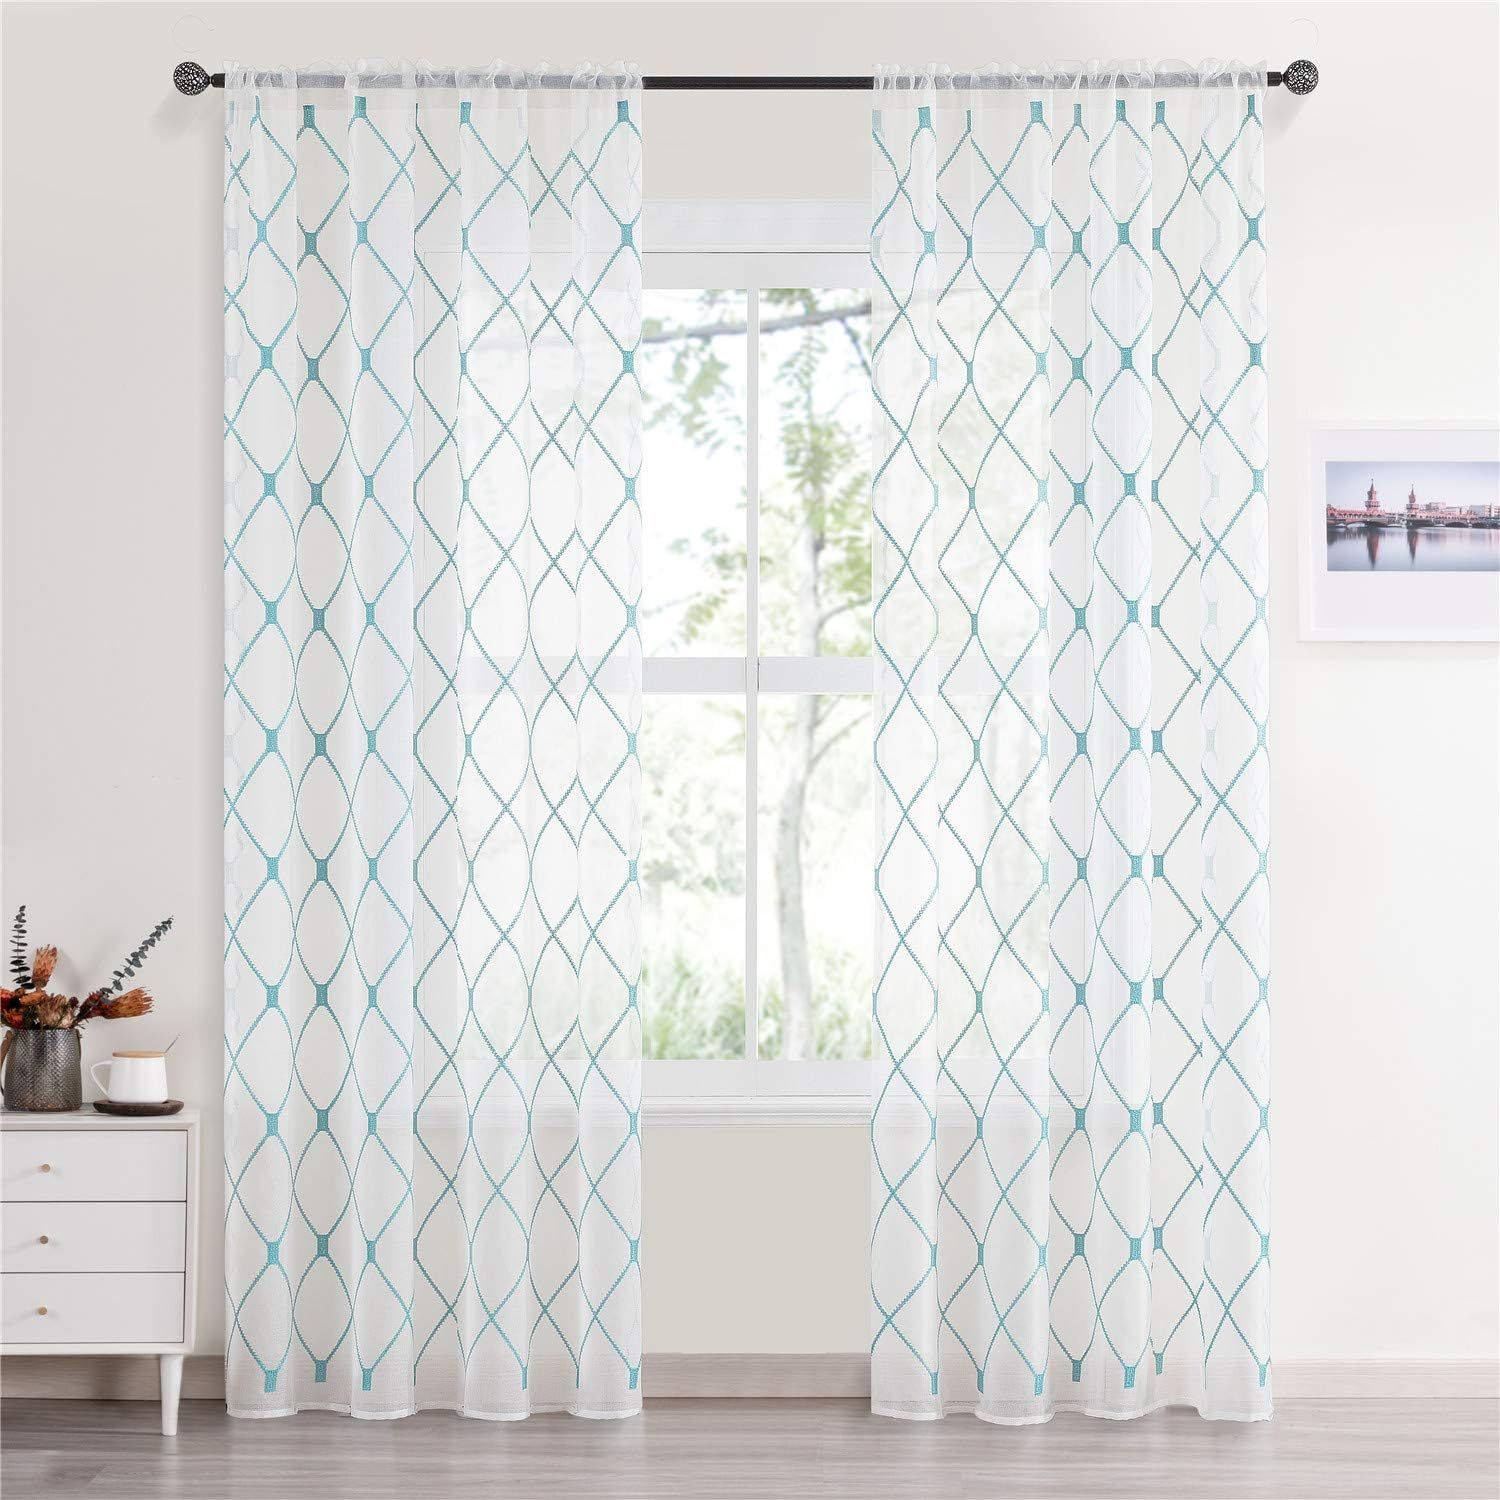 Top Finel White Sheer Curtains 84 Inches Length for Living Room Bedroom Teal Diamond Embroidered ... | Amazon (US)